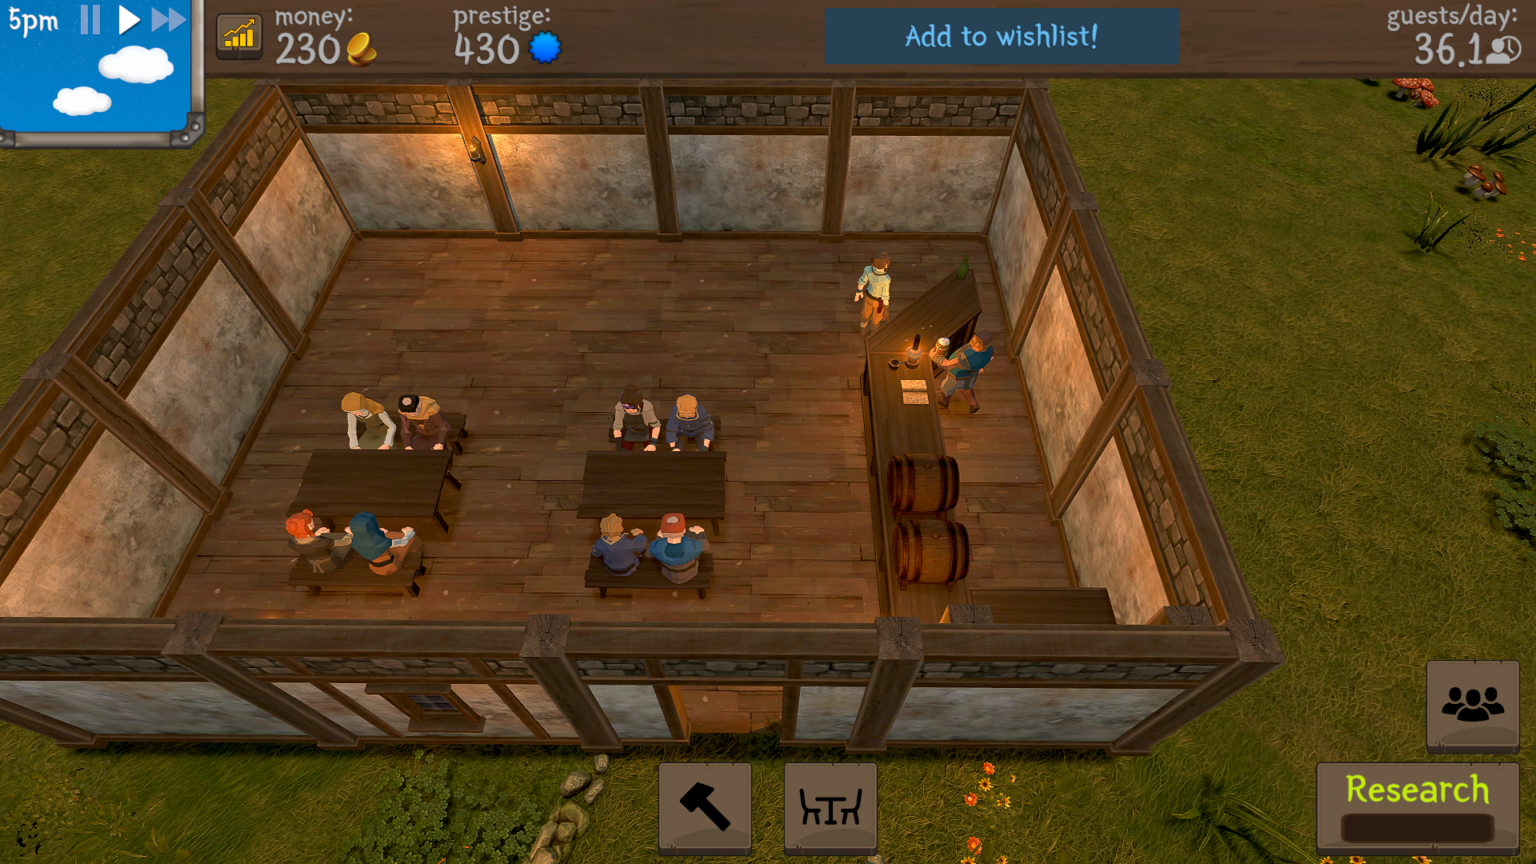 tavern master review